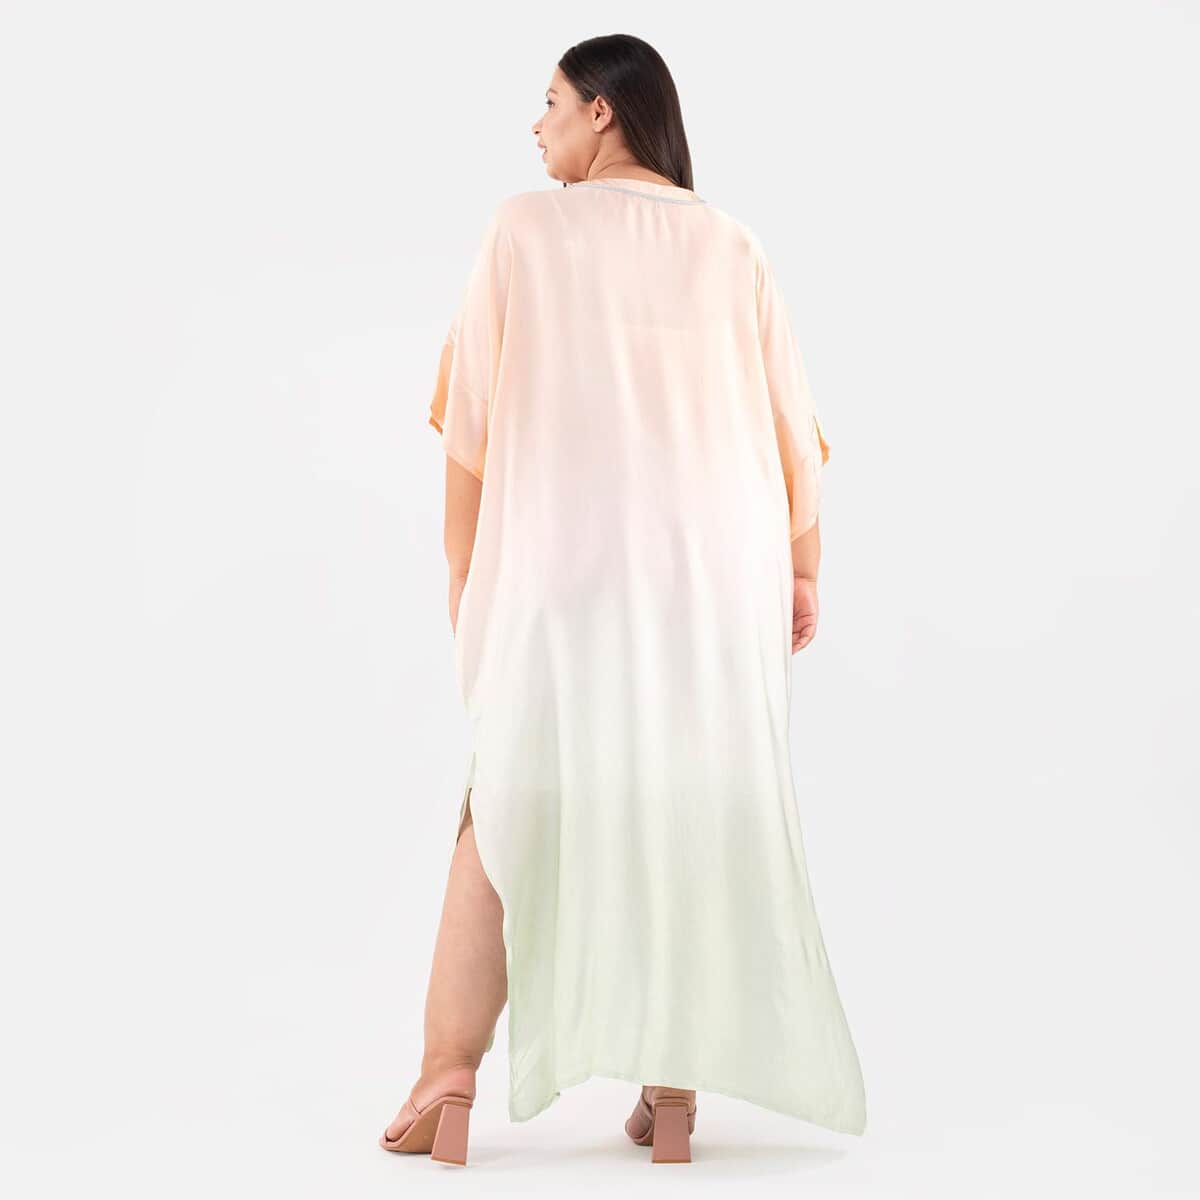 Tamsy Peach Bemberg Silk Ombre Dye V-Neck with Lace Long Kaftan - One Size Fits Most image number 1